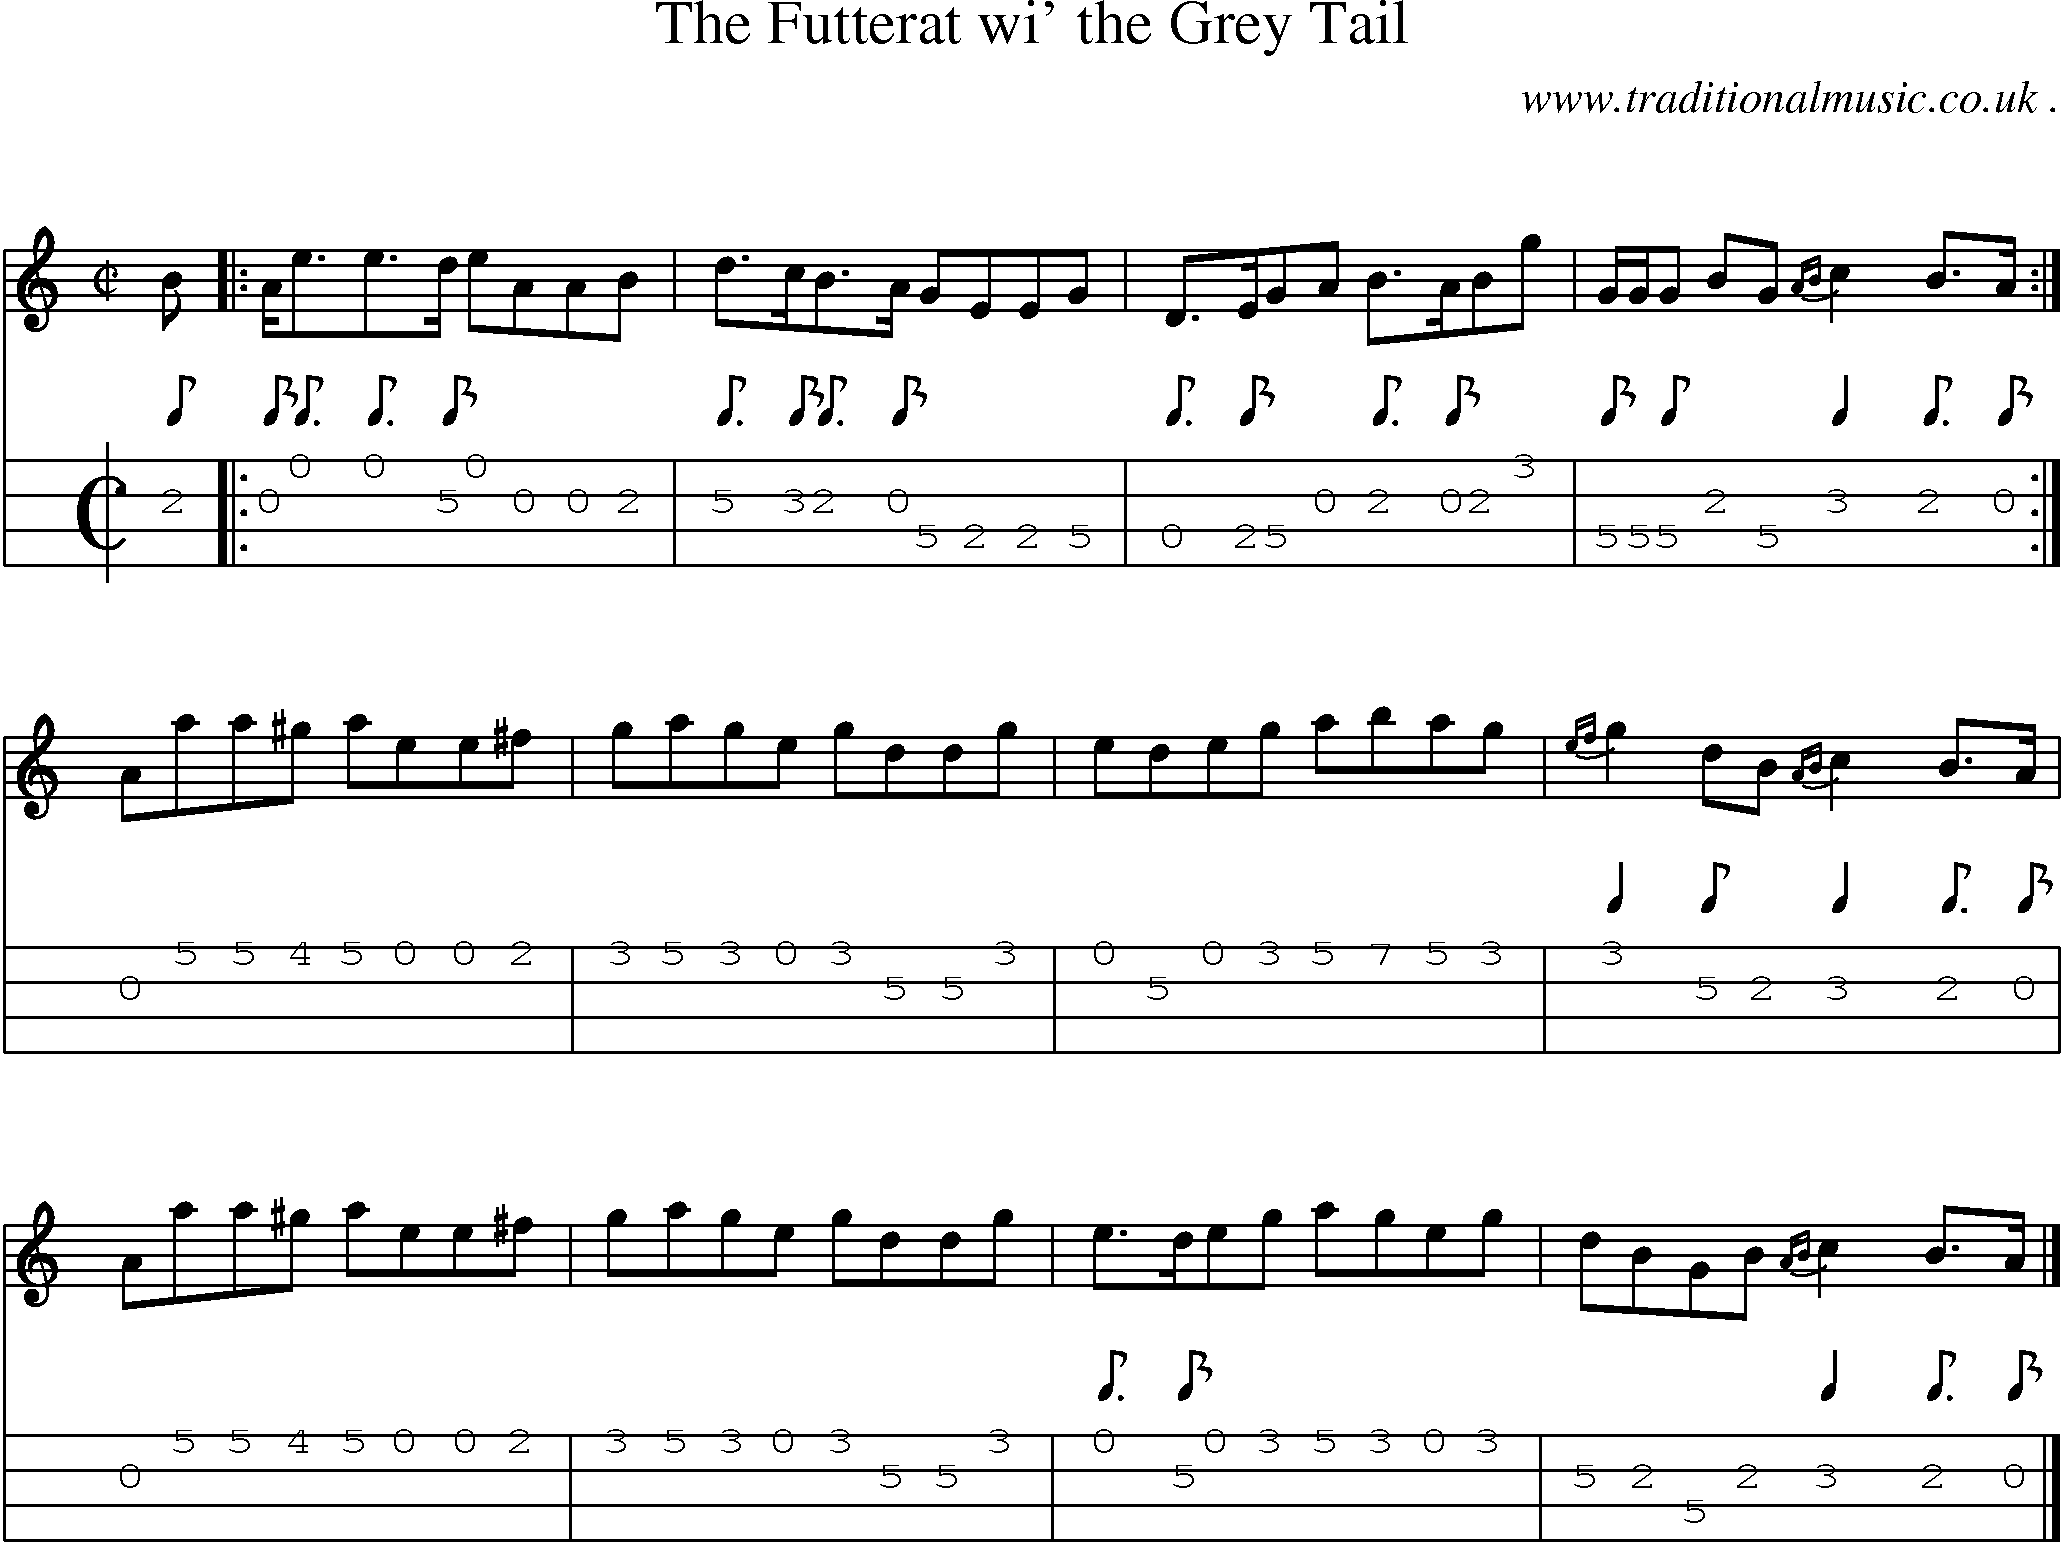 Sheet-music  score, Chords and Mandolin Tabs for The Futterat Wi The Grey Tail